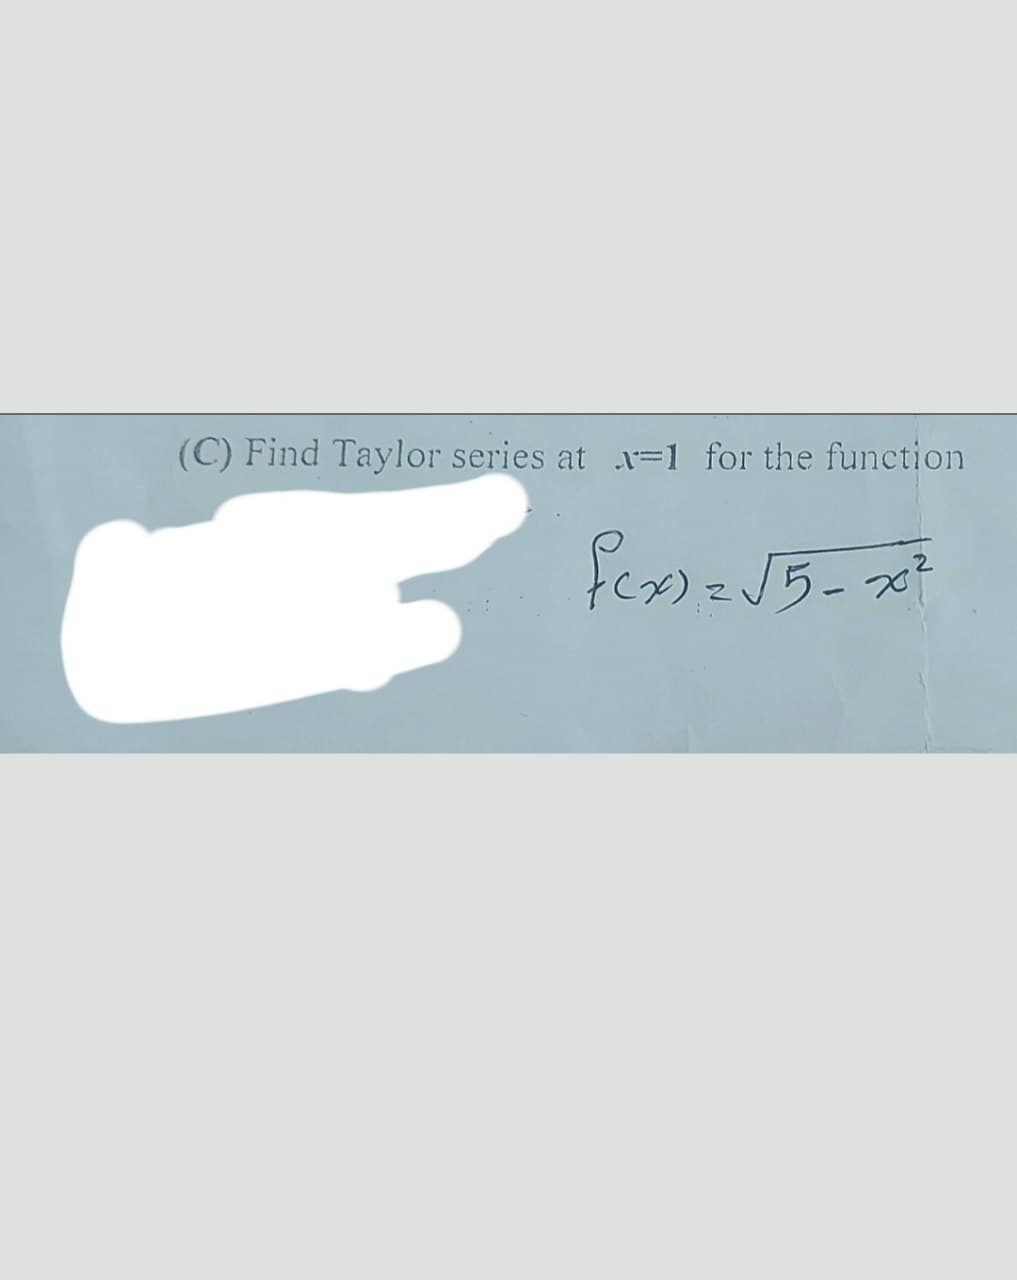 (C) Find Taylor series at x-1 for the function
3
f(x) = √5-x²